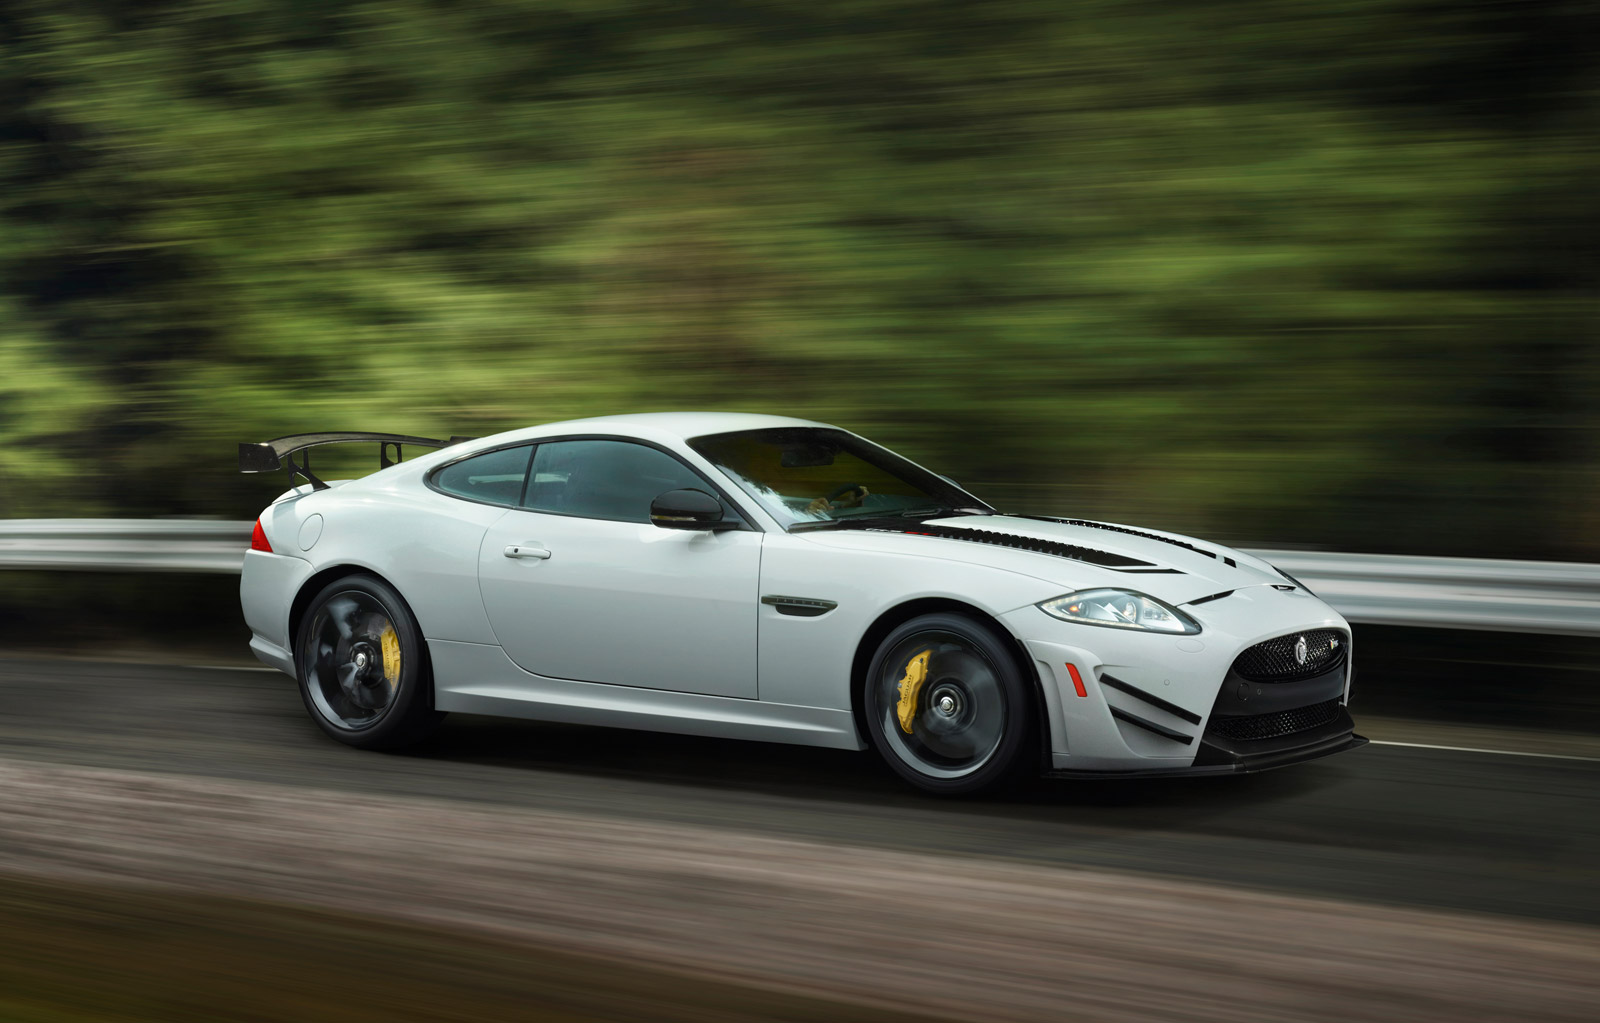 2014 Jaguar XKR-S GT: Track-Tuned For The Street